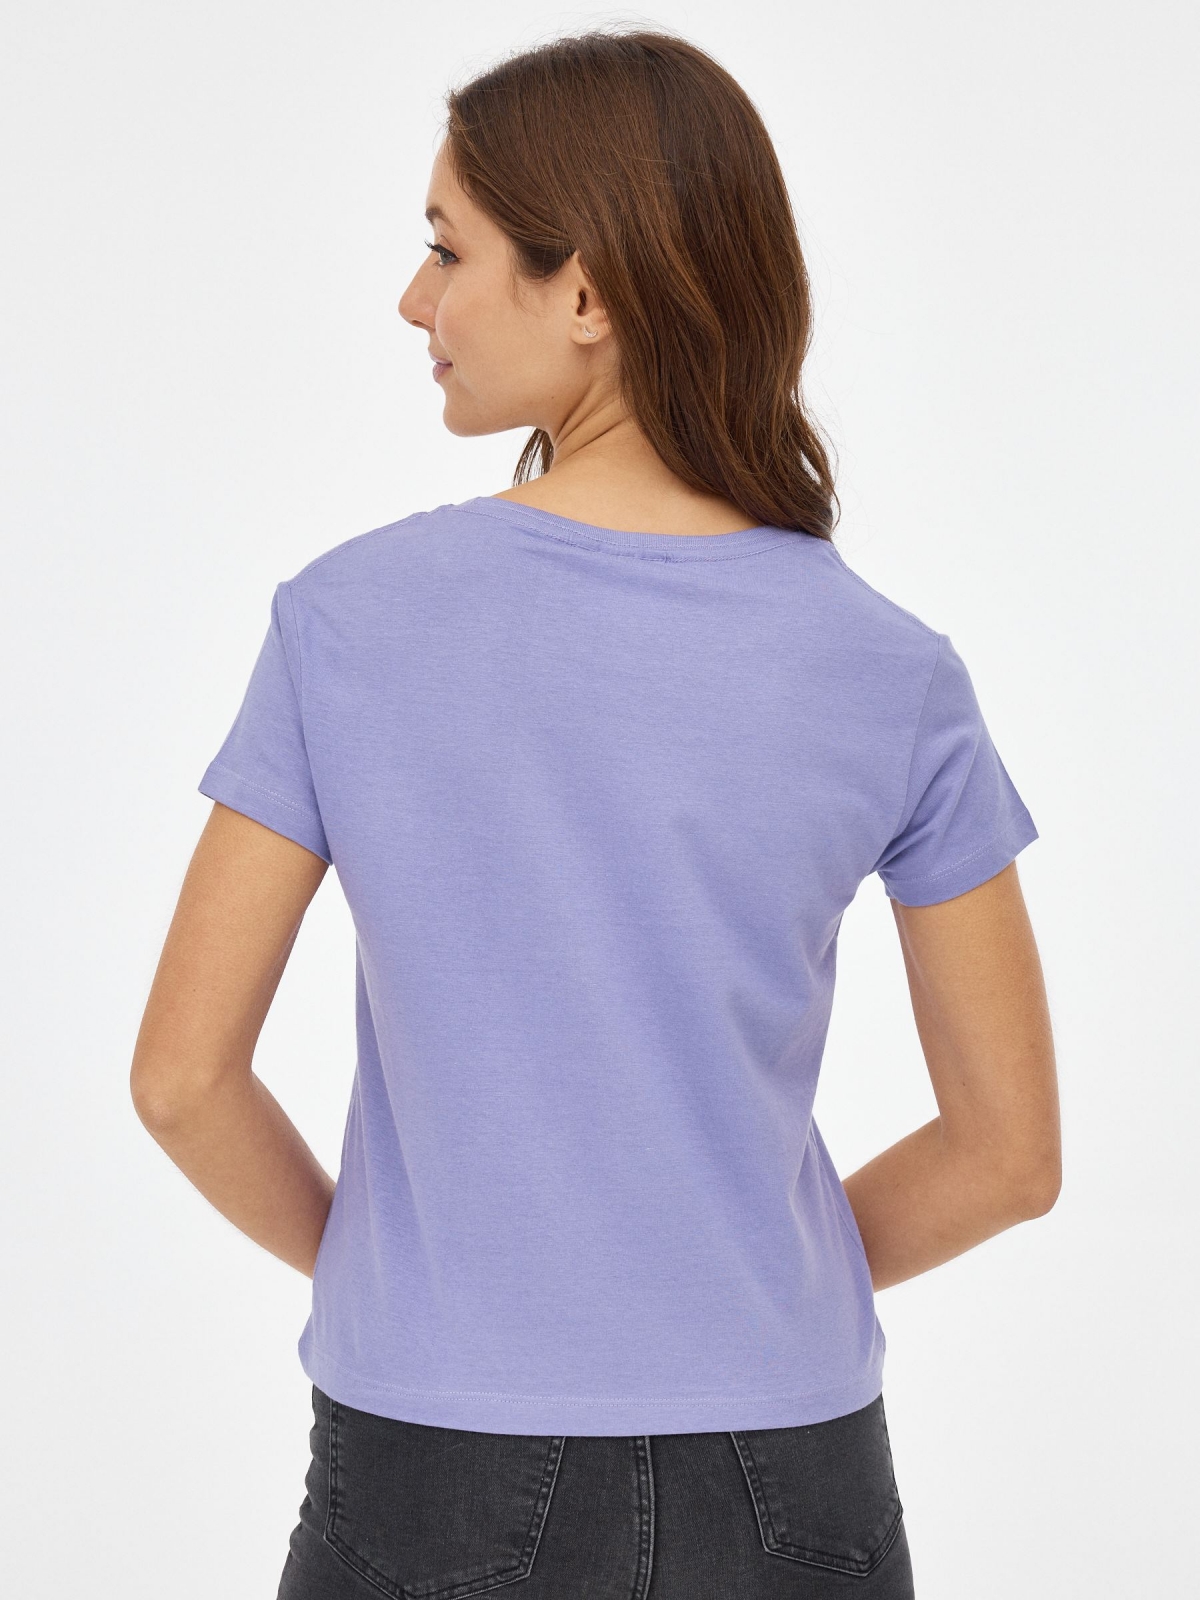 Stitch t-shirt lilac middle back view